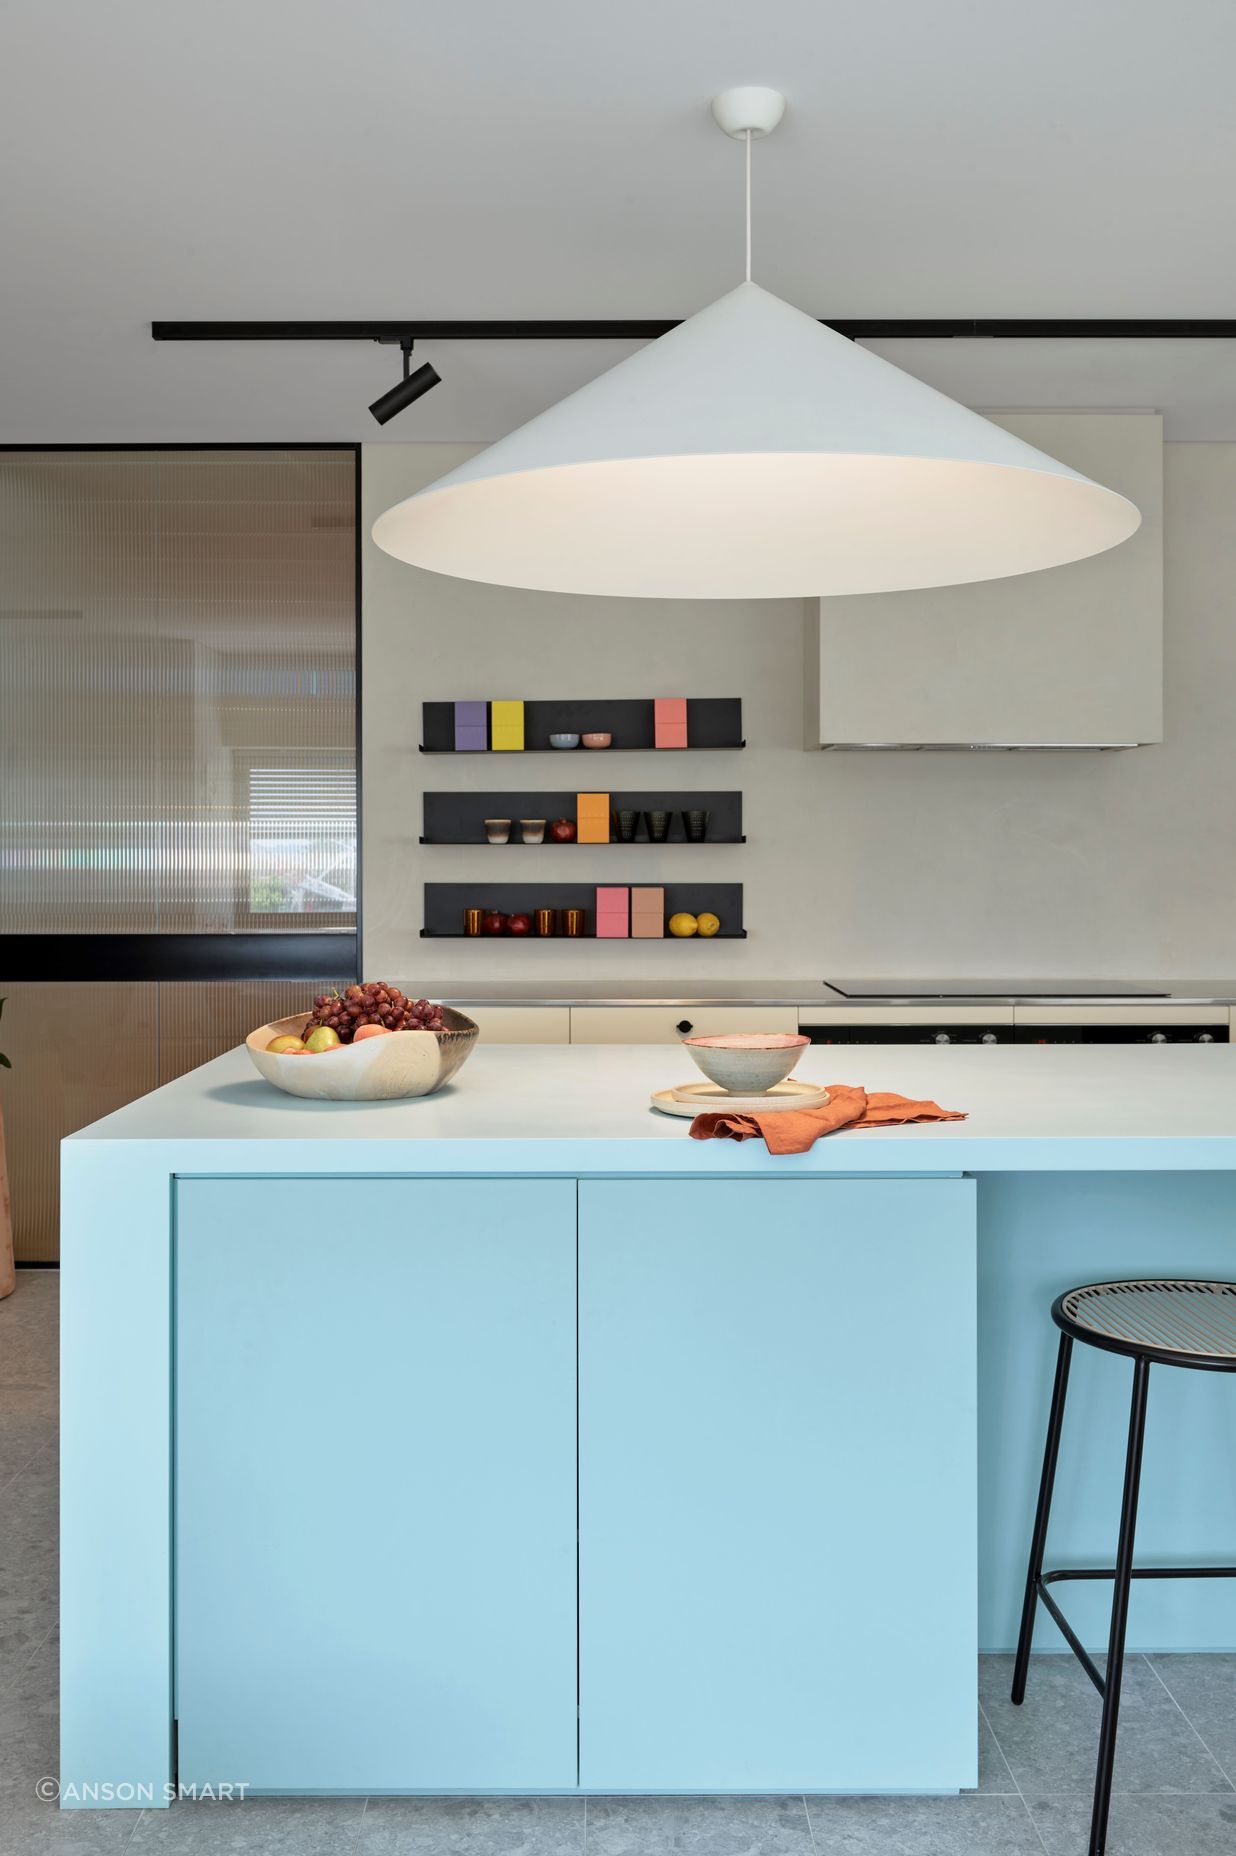 The kitchen combines strong shapes with soft, pastel colours to create a homely yet robust space for the staff to cook and eat.